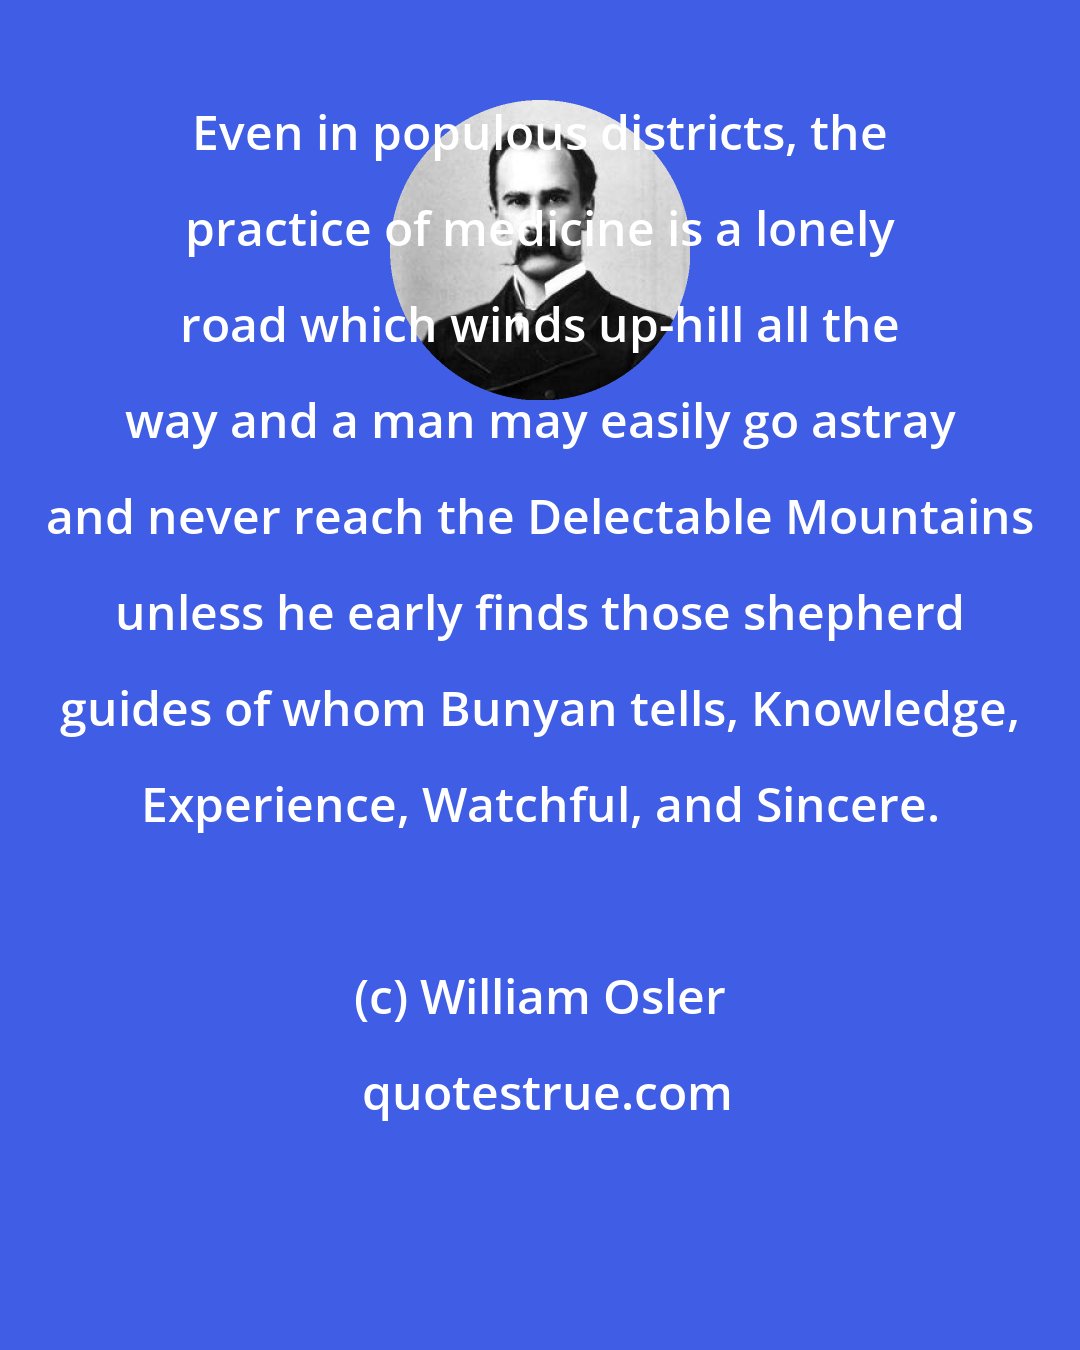 William Osler: Even in populous districts, the practice of medicine is a lonely road which winds up-hill all the way and a man may easily go astray and never reach the Delectable Mountains unless he early finds those shepherd guides of whom Bunyan tells, Knowledge, Experience, Watchful, and Sincere.